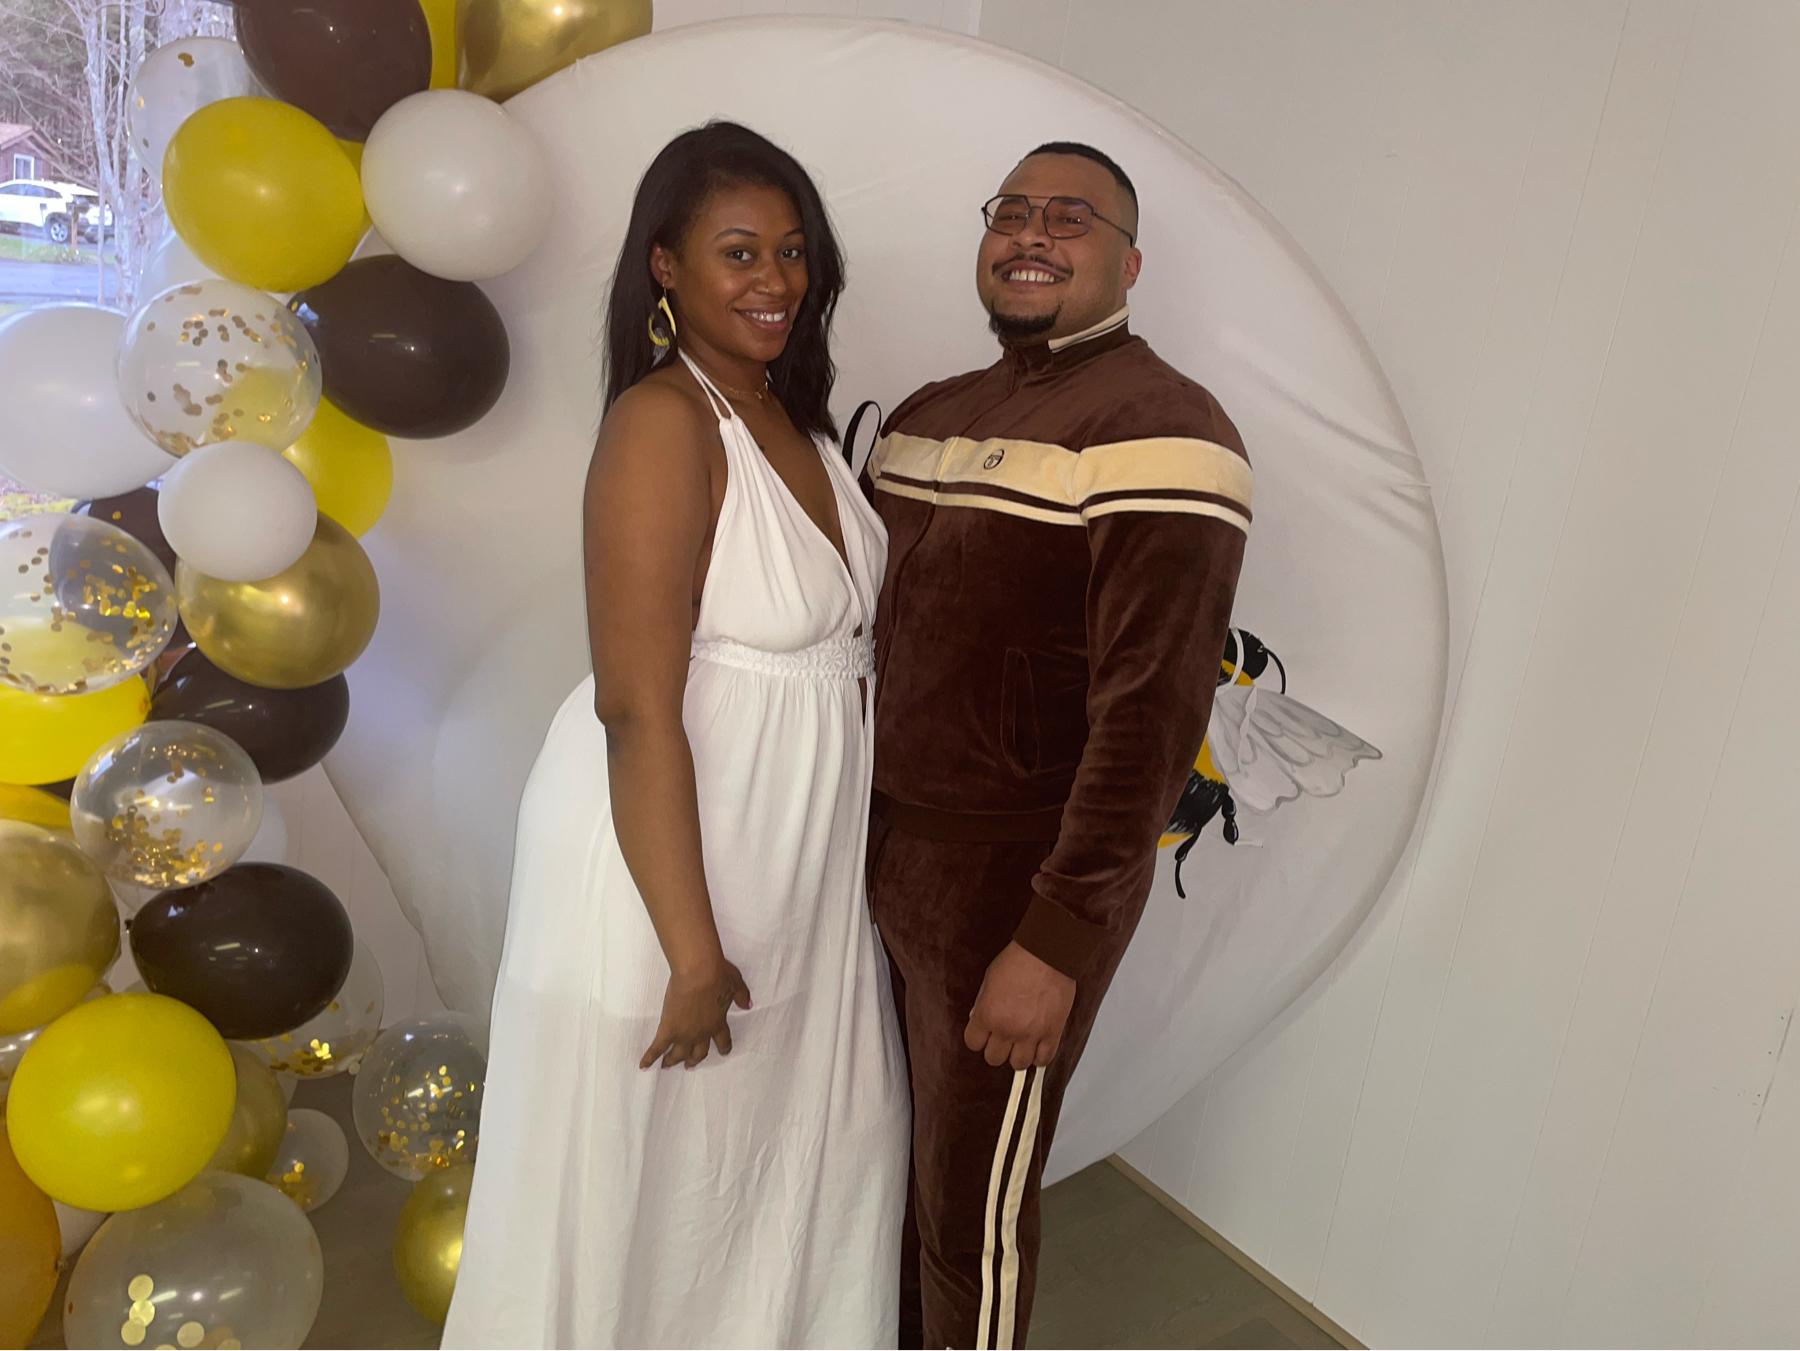 The Wedding Website of Nia White and Kyrell Brown